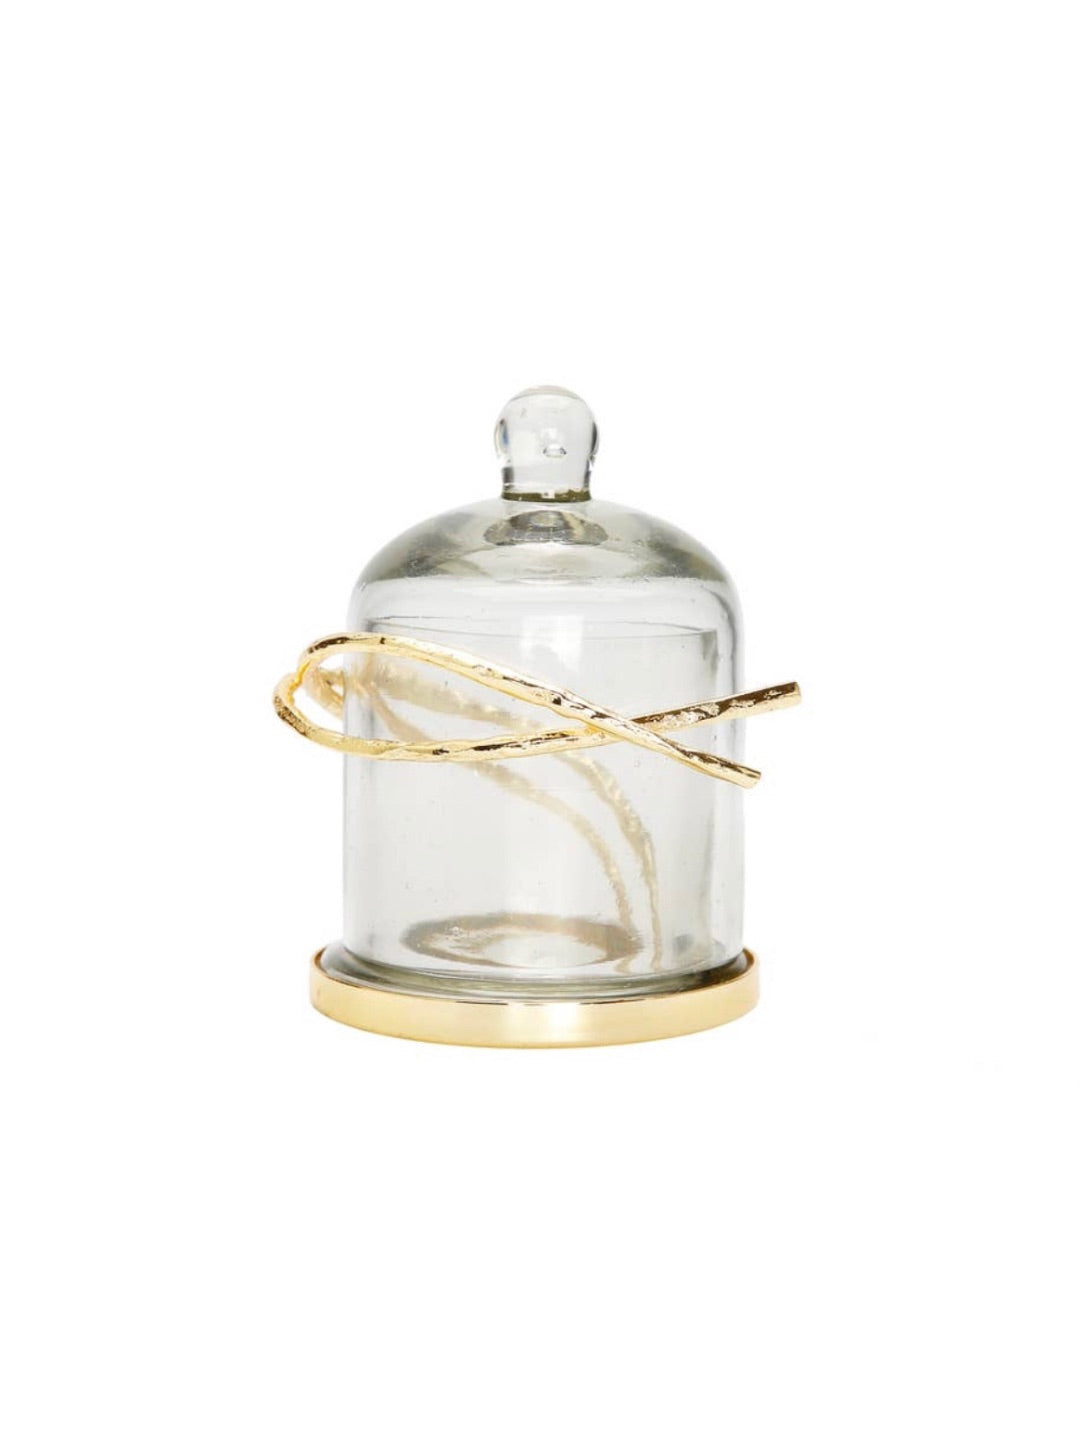 Candle Holder with Glass Dome and Gold Twig Design (Small)